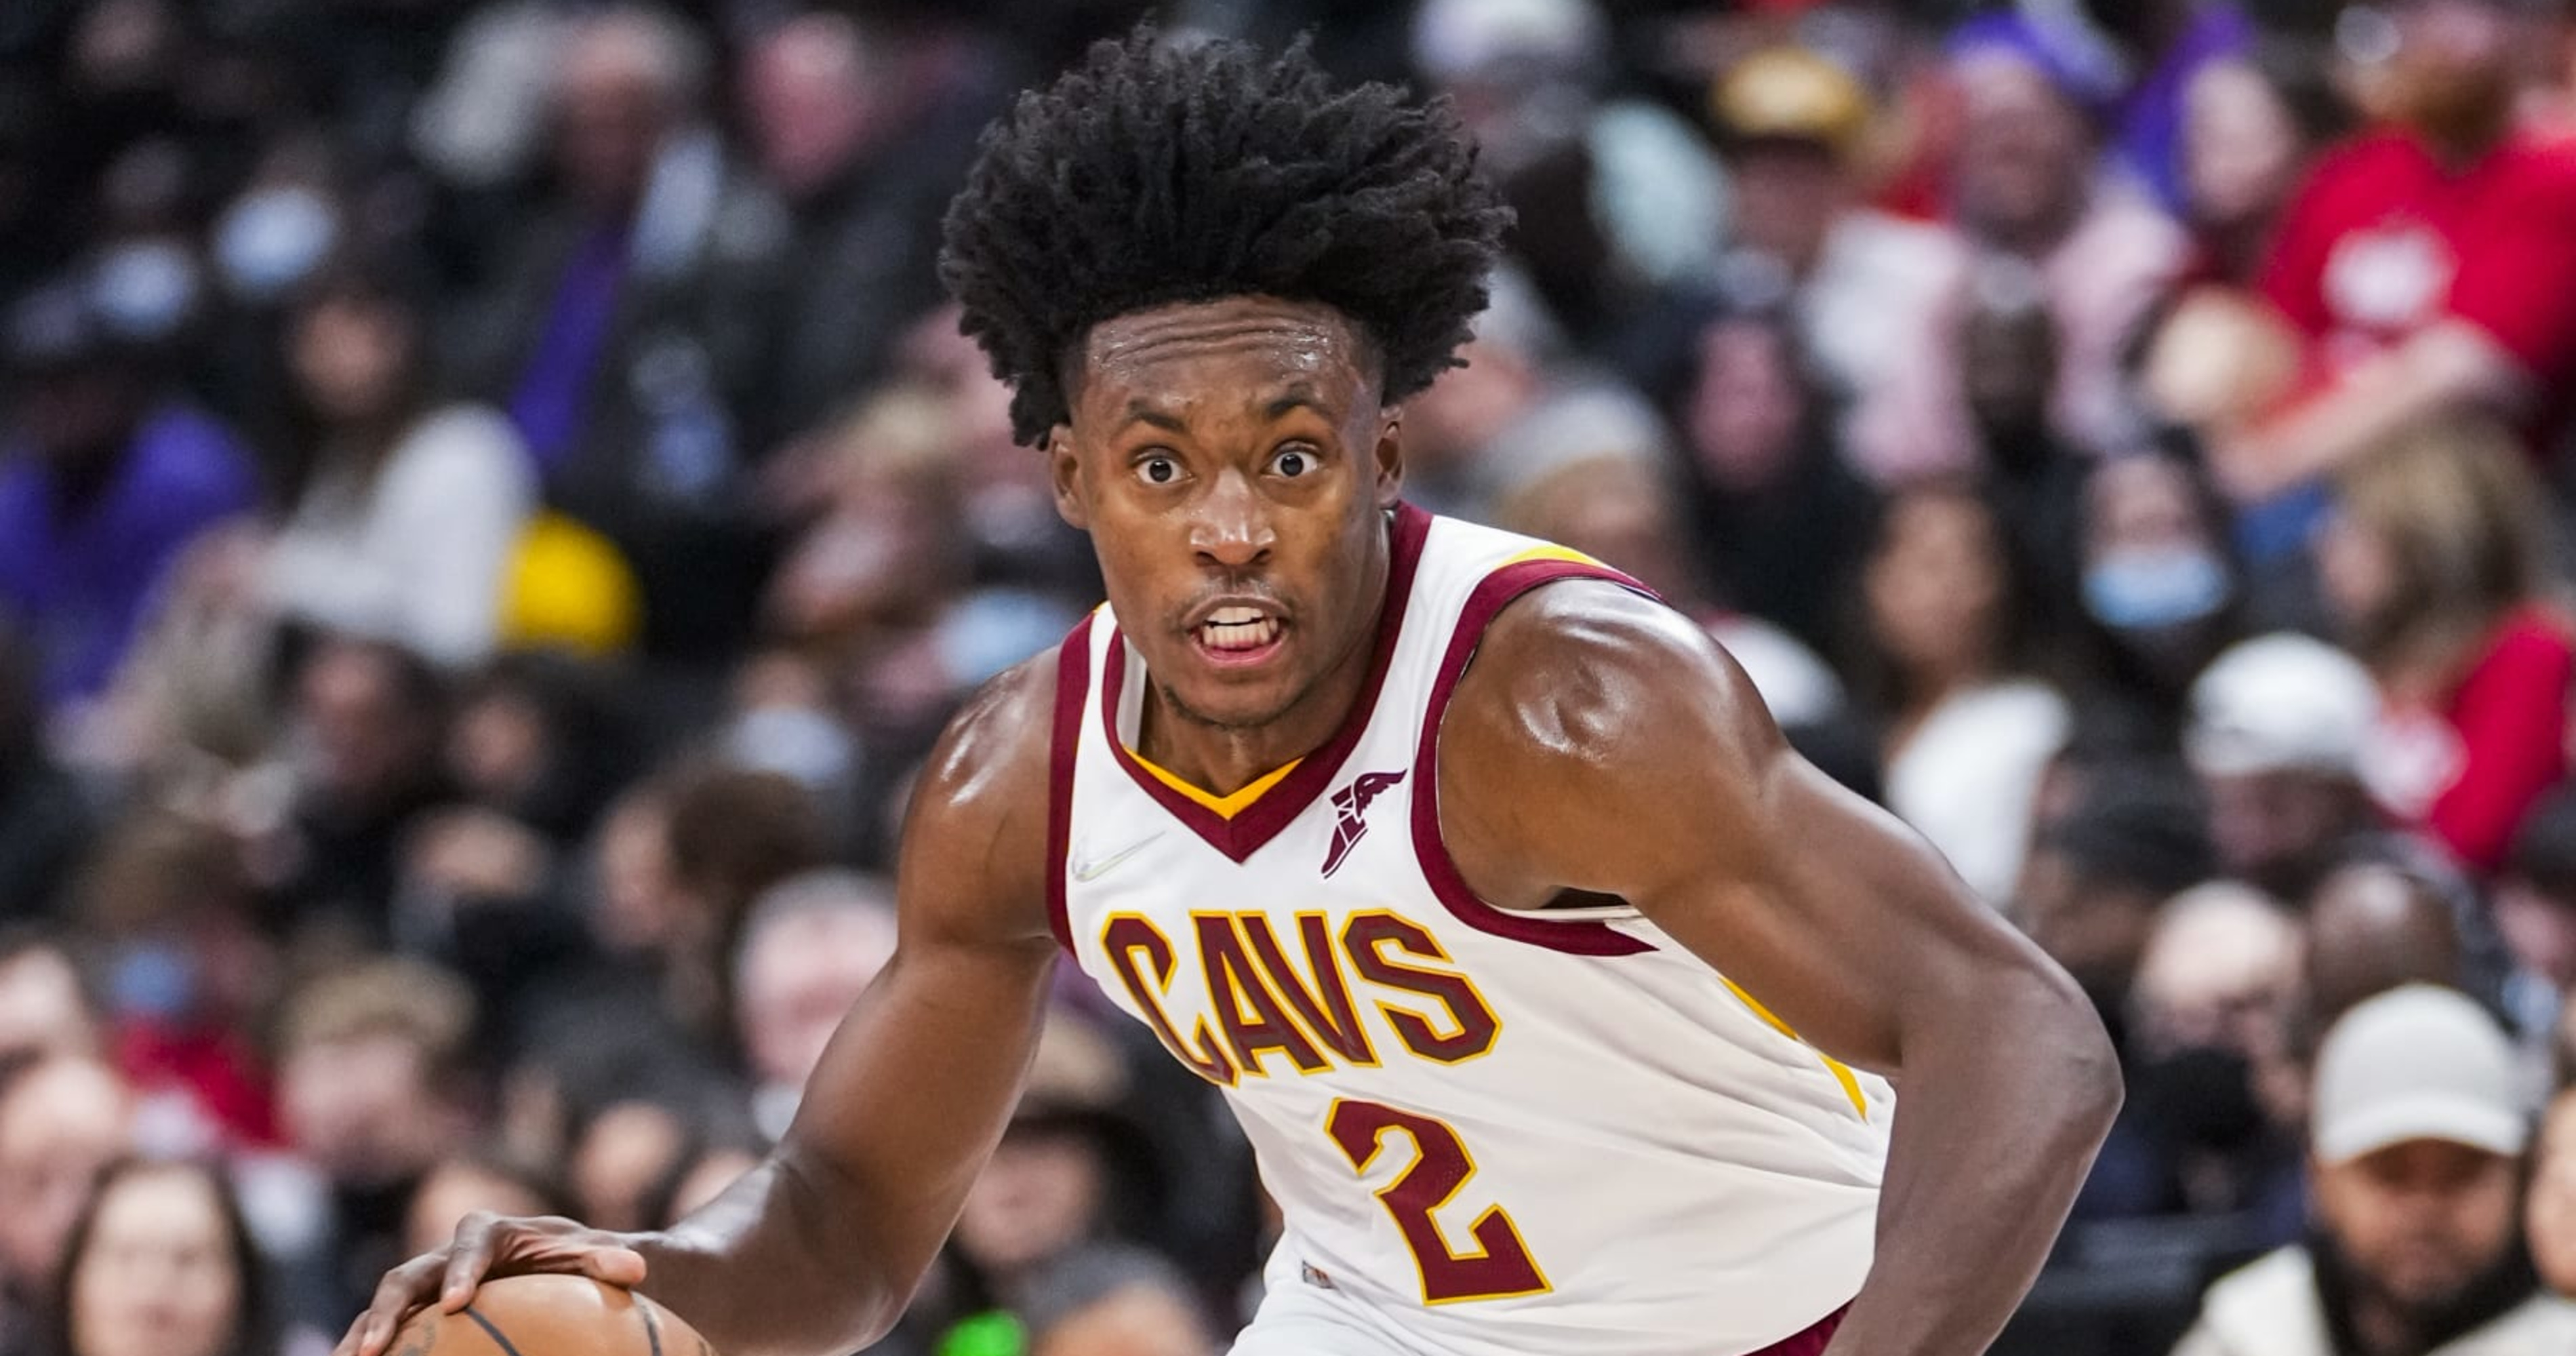 Miles Bridges, Collin Sexton among players receiving qualifying offers